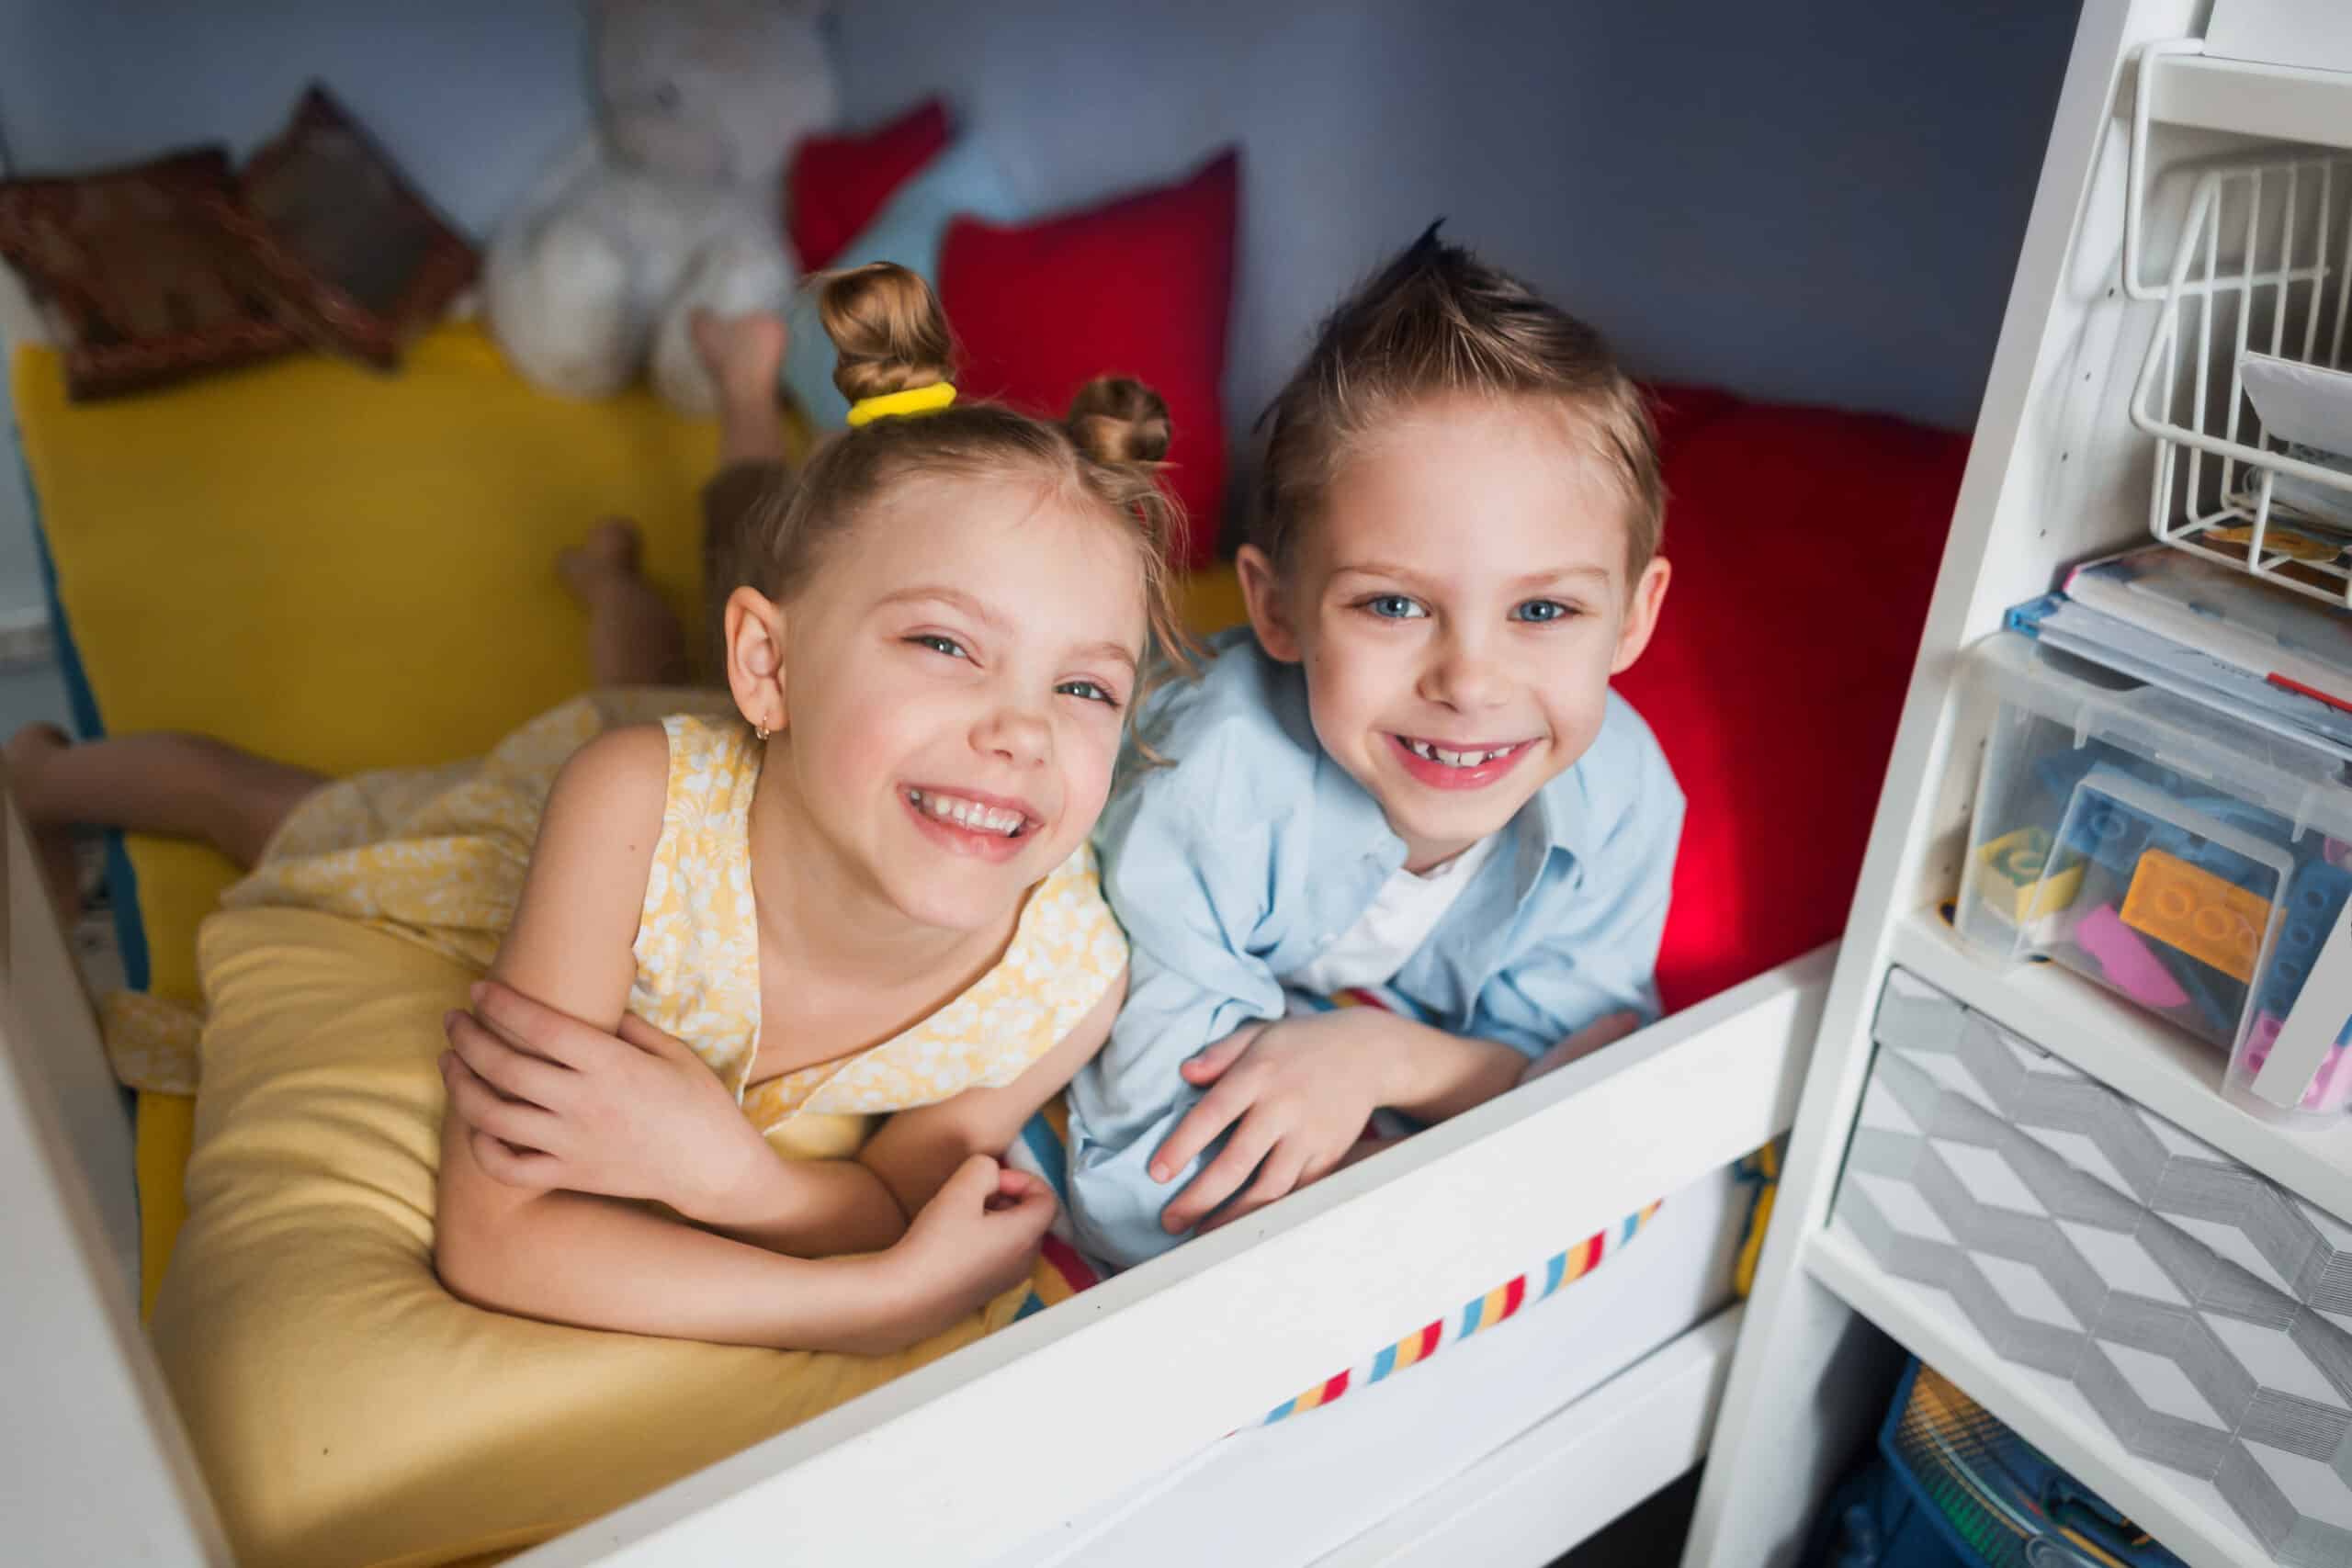 Two children in a loft bed